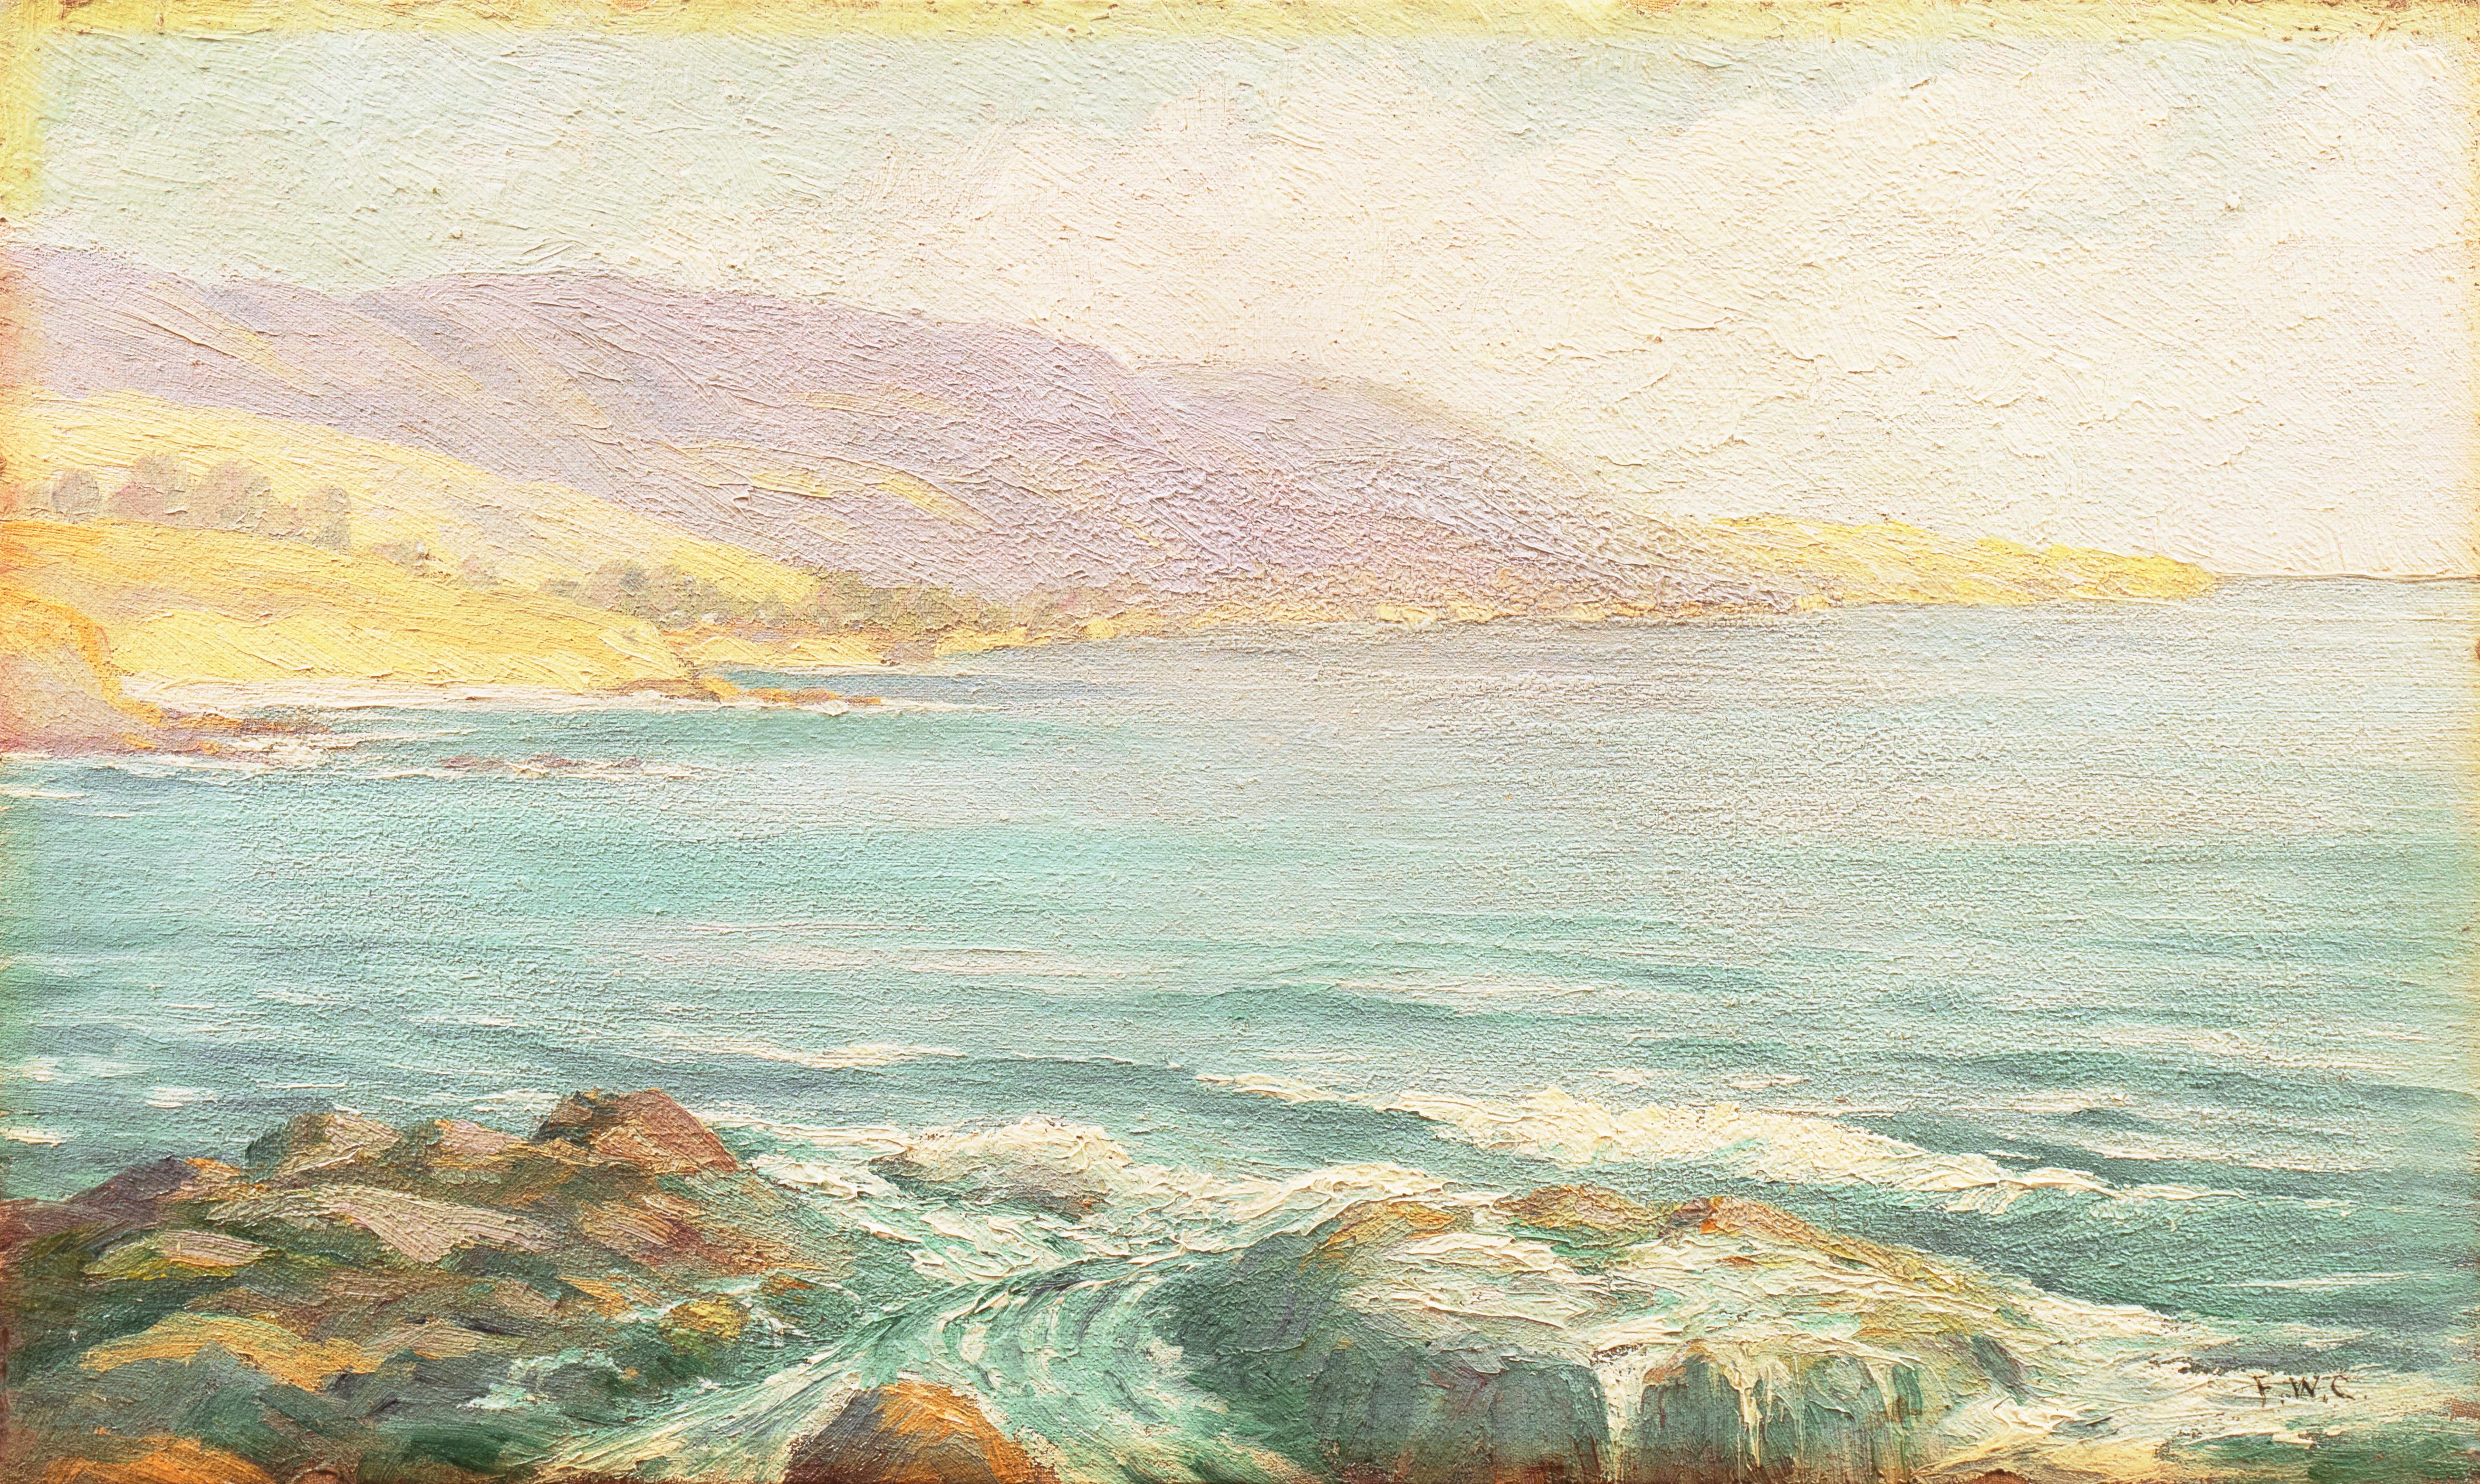  'California Headlands with a View of the Pacific', SFAA, Laguna Beach, ASL NYC 2